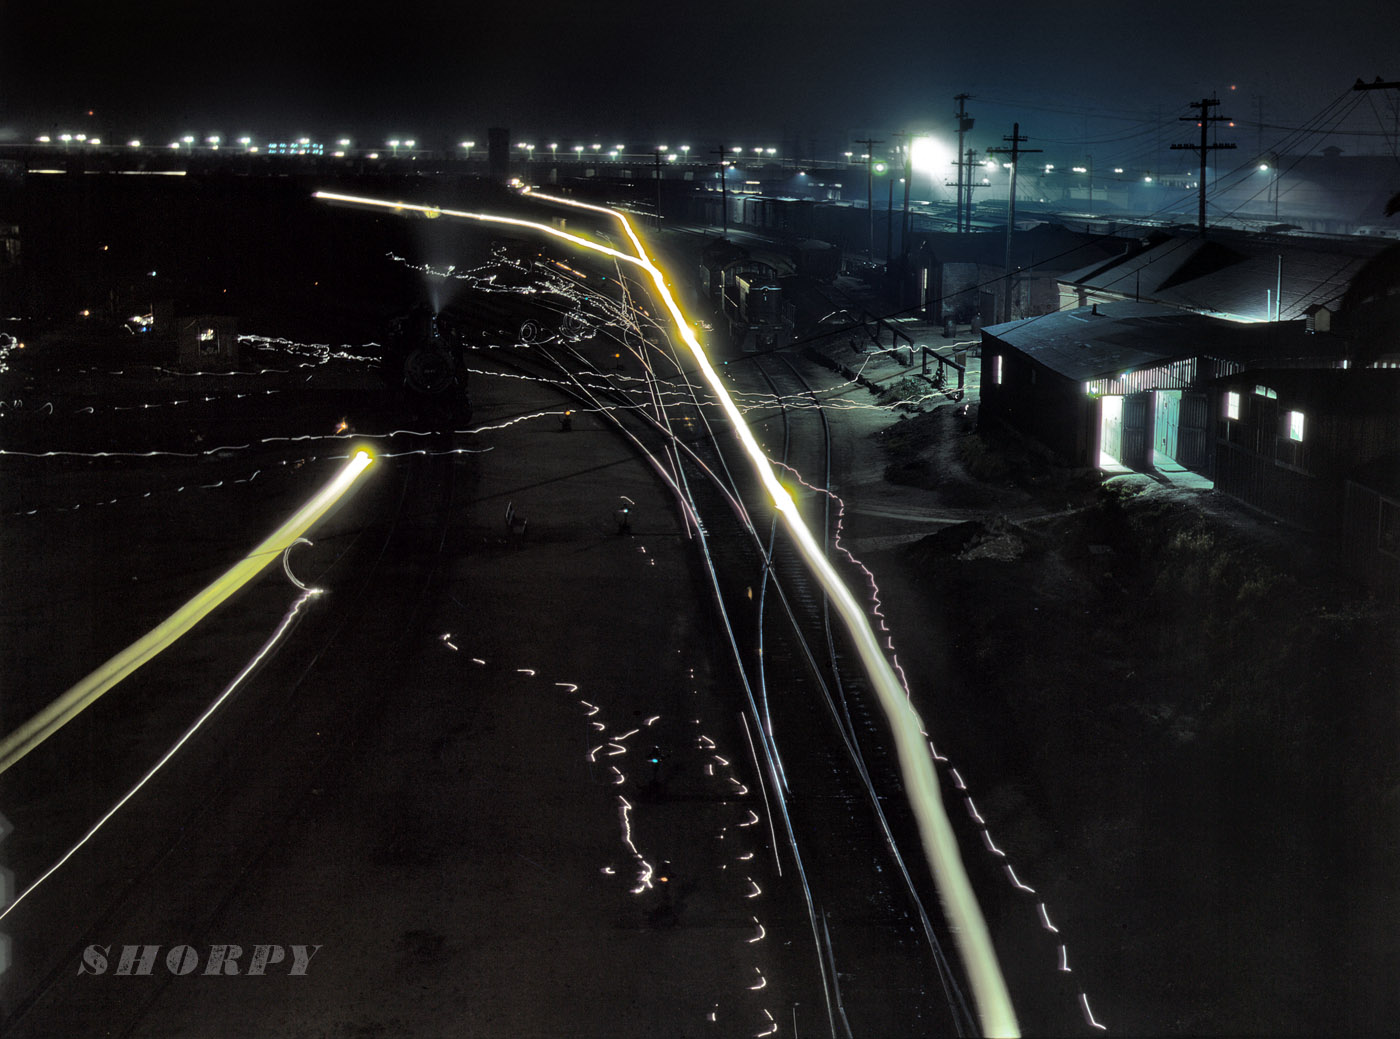 March 1943. Another night shot by Jack Delano, taken on his Santa Fe rail trip west from Chicago in 1943. His description of this scene: "Activity in the Santa Fe R.R. yard, Los Angeles. Due to blackout regulations, floodlights, switch lights, locomotive headlights and lights on the bridge in background have been shaded to cast light downward. Broad streaks of light are caused by paths of locomotive headlights, thin wavy lines by lamps of switchmen working in the yard." 4x5 Kodachrome transparency by Jack Delano. View full size.